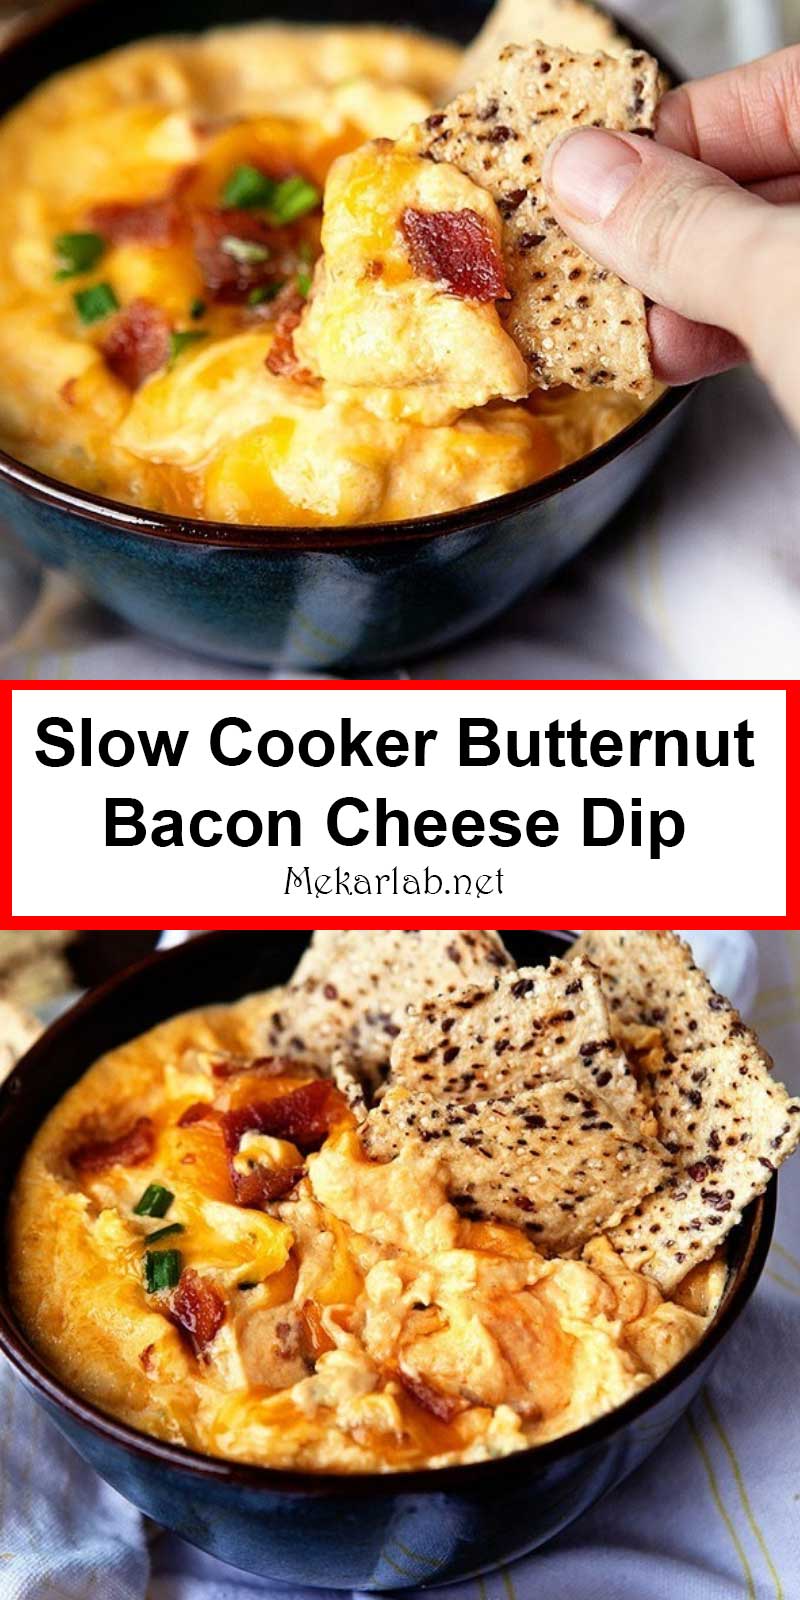 Slow Cooker Butternut Bacon Cheese Dip